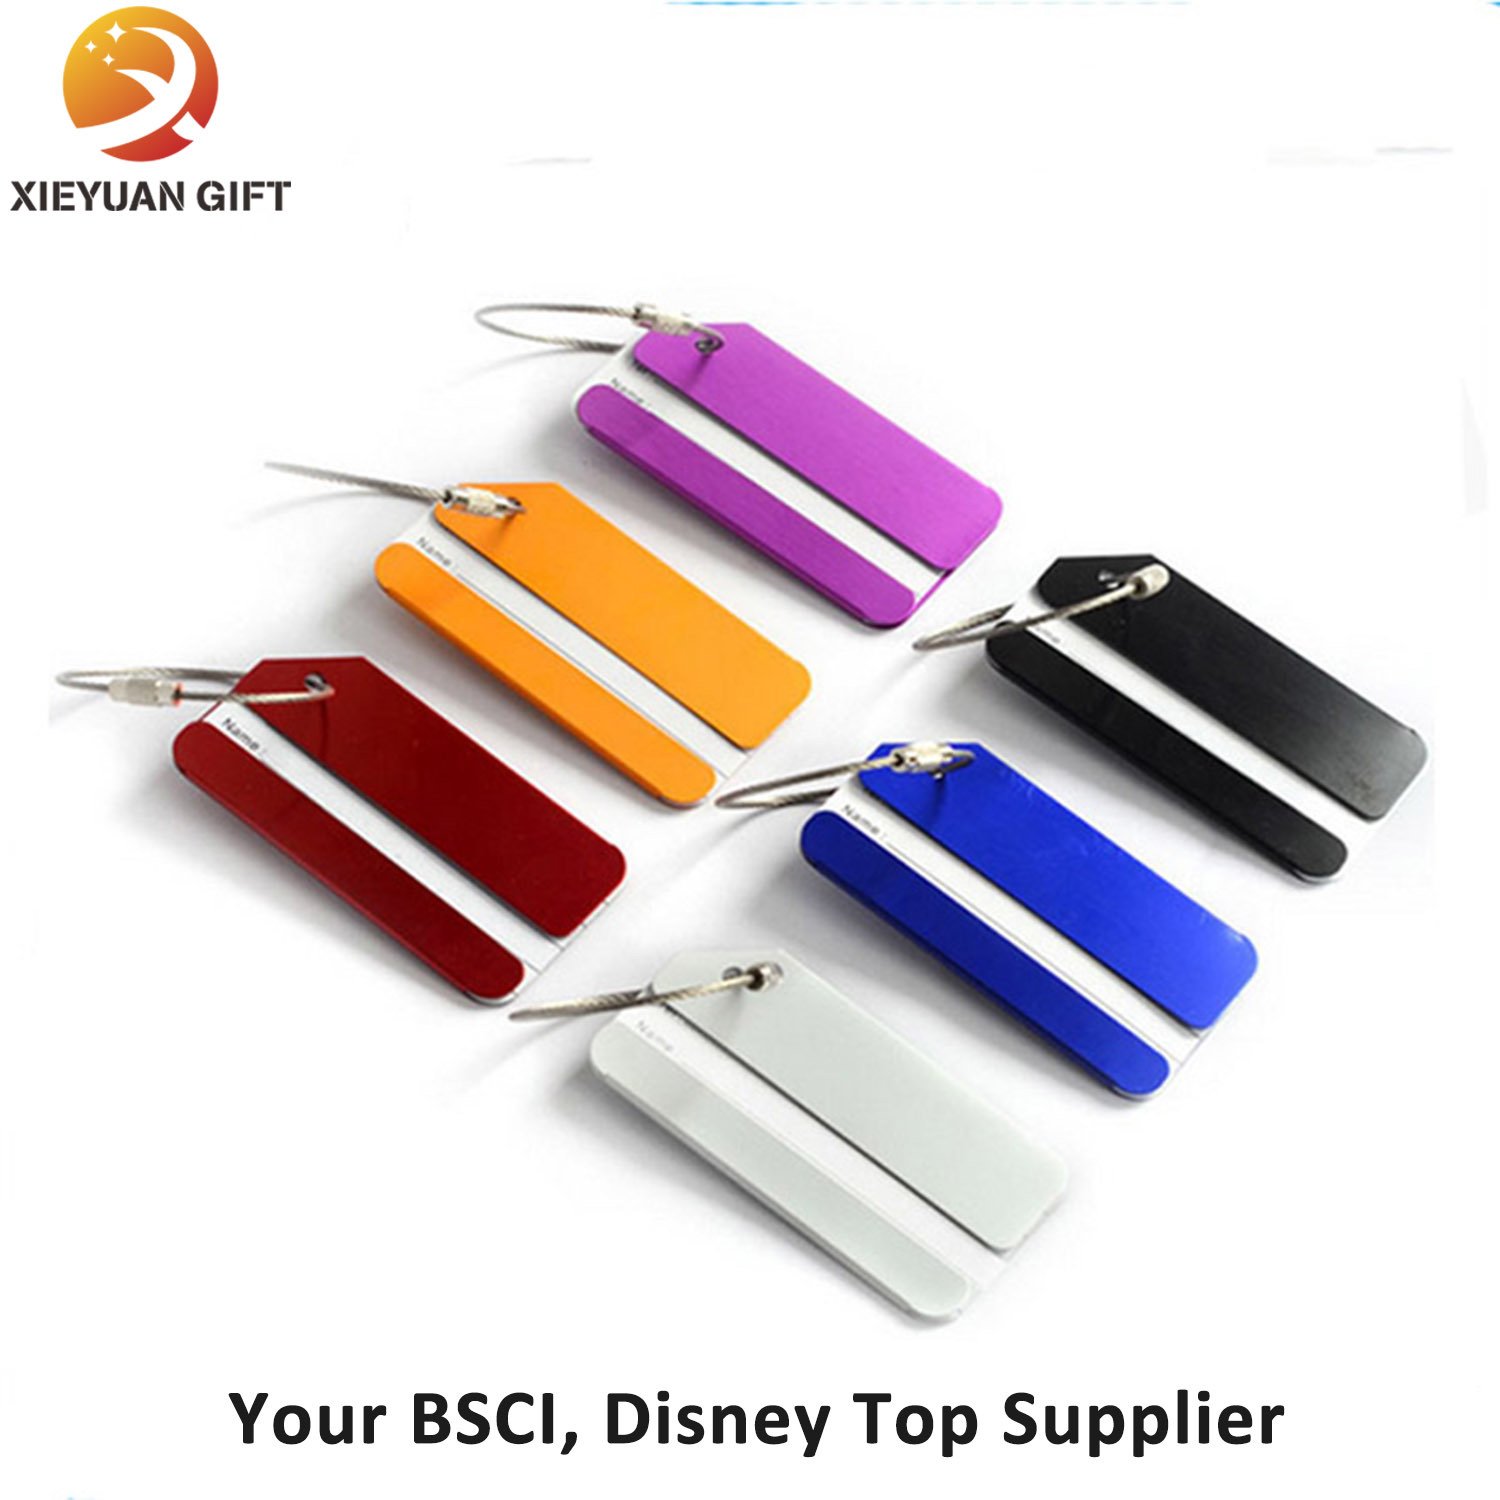 High Quality Genuine Leather Luggage Tag with Strap